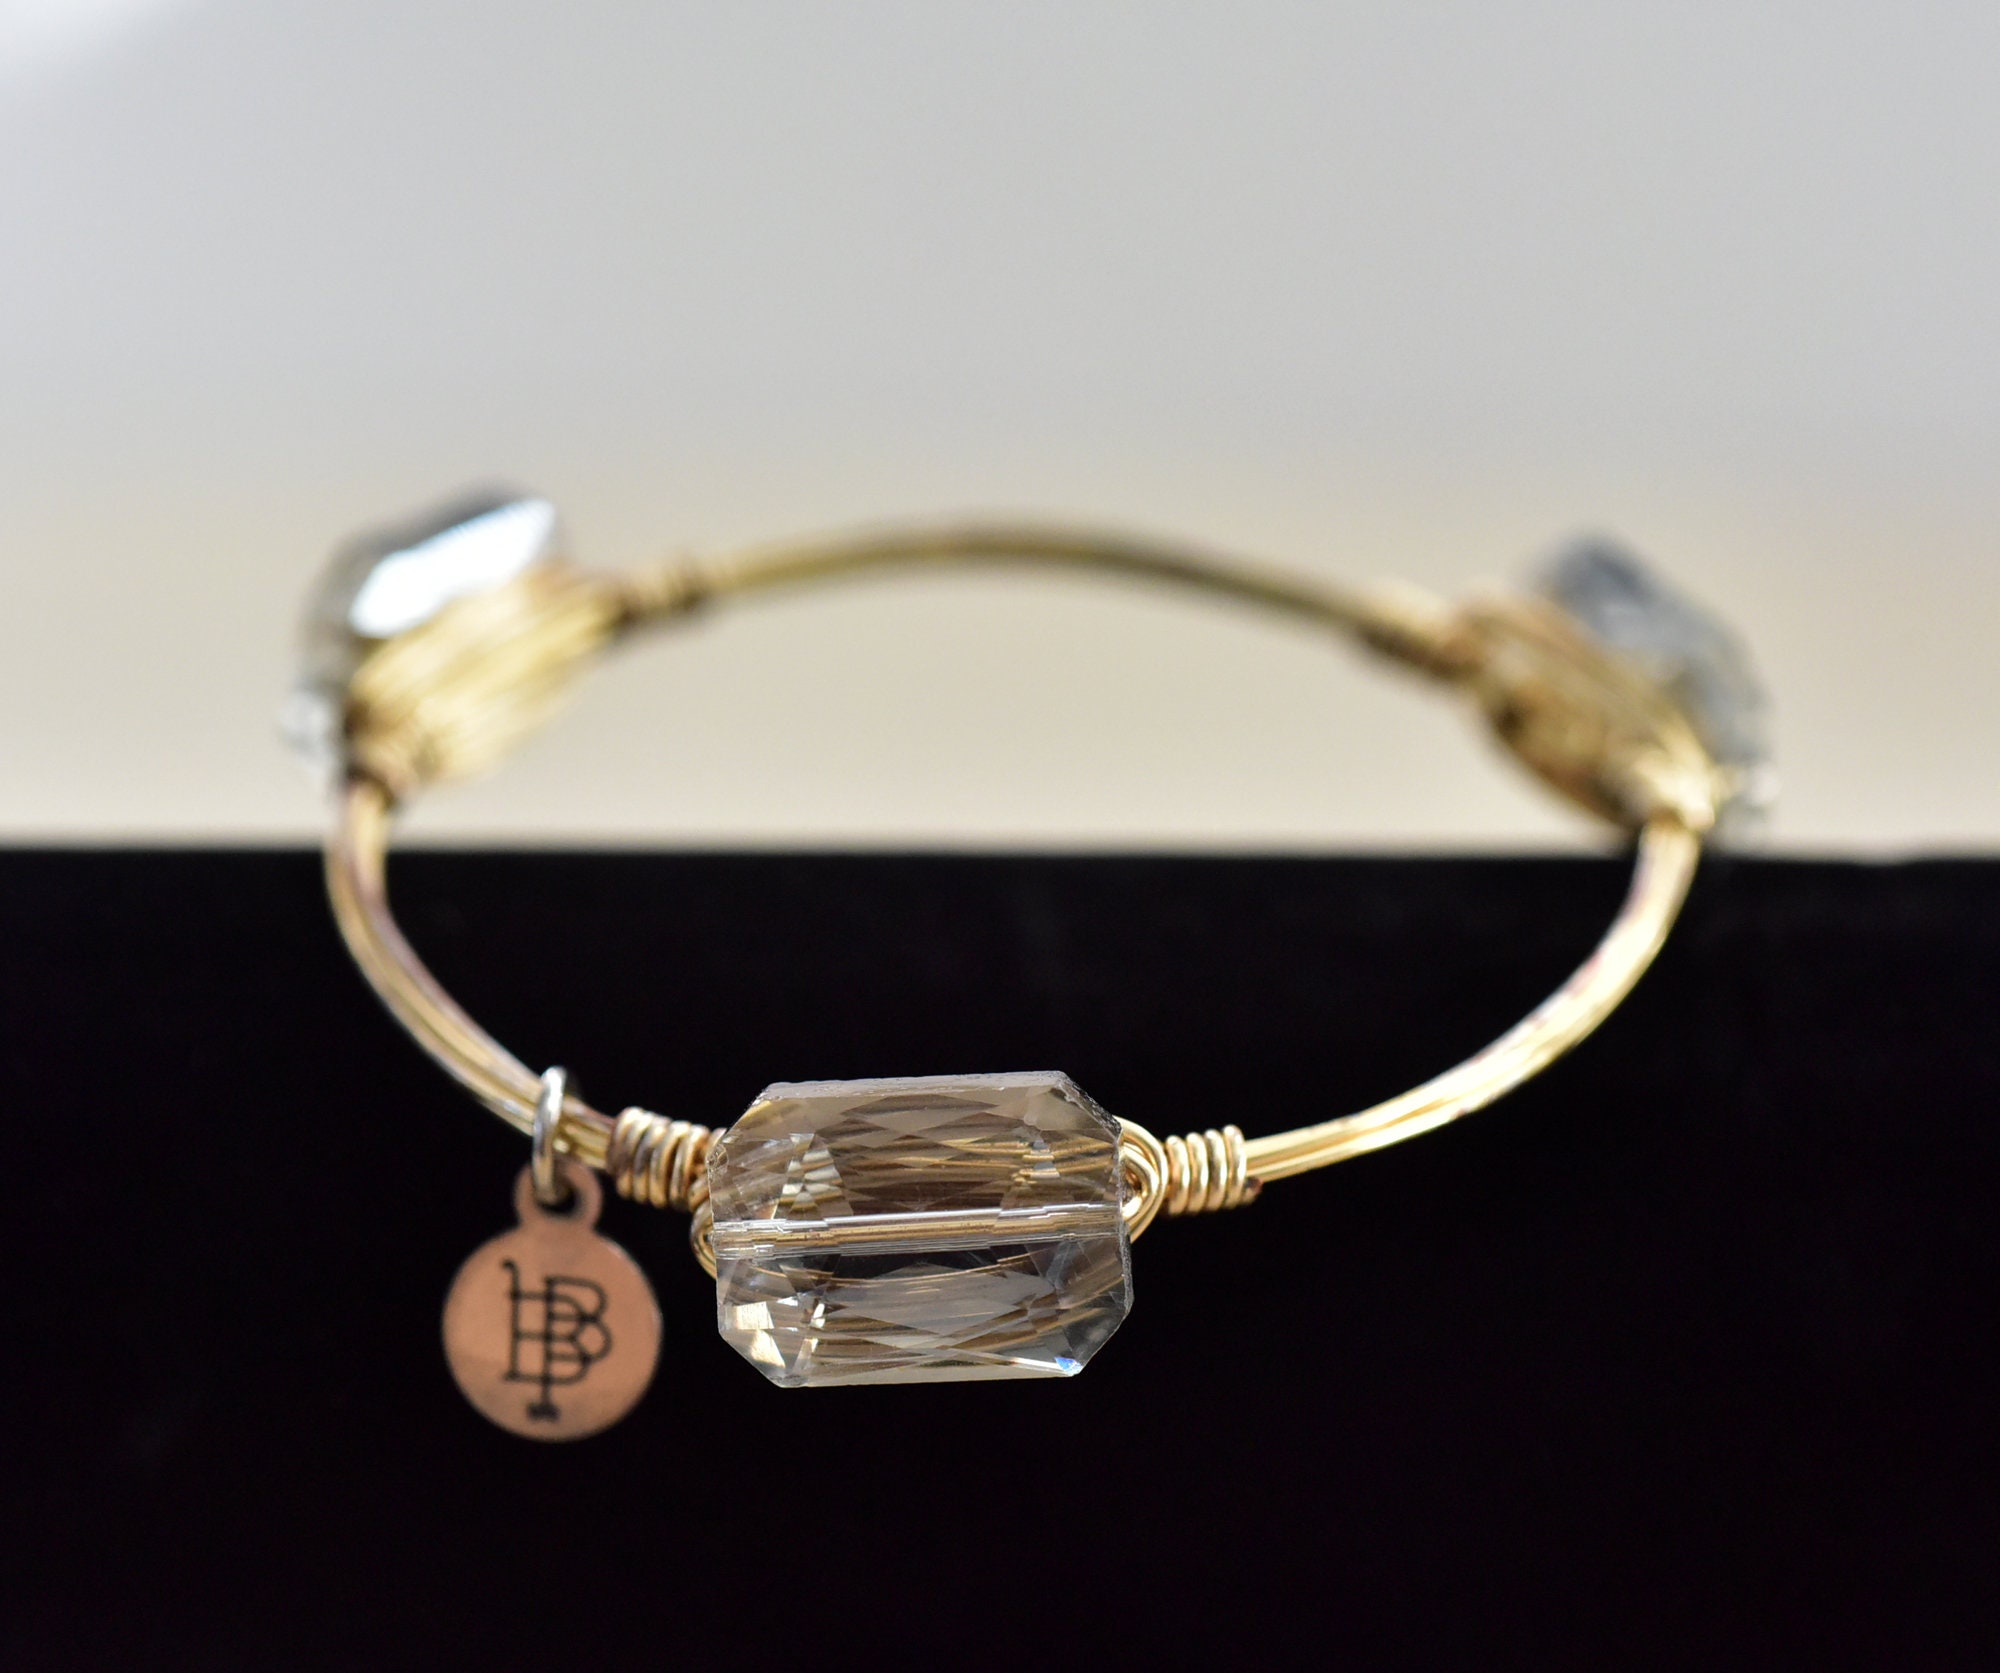 The Gold Kentucky Initial Bangle Bracelet - Bourbon and Boweties